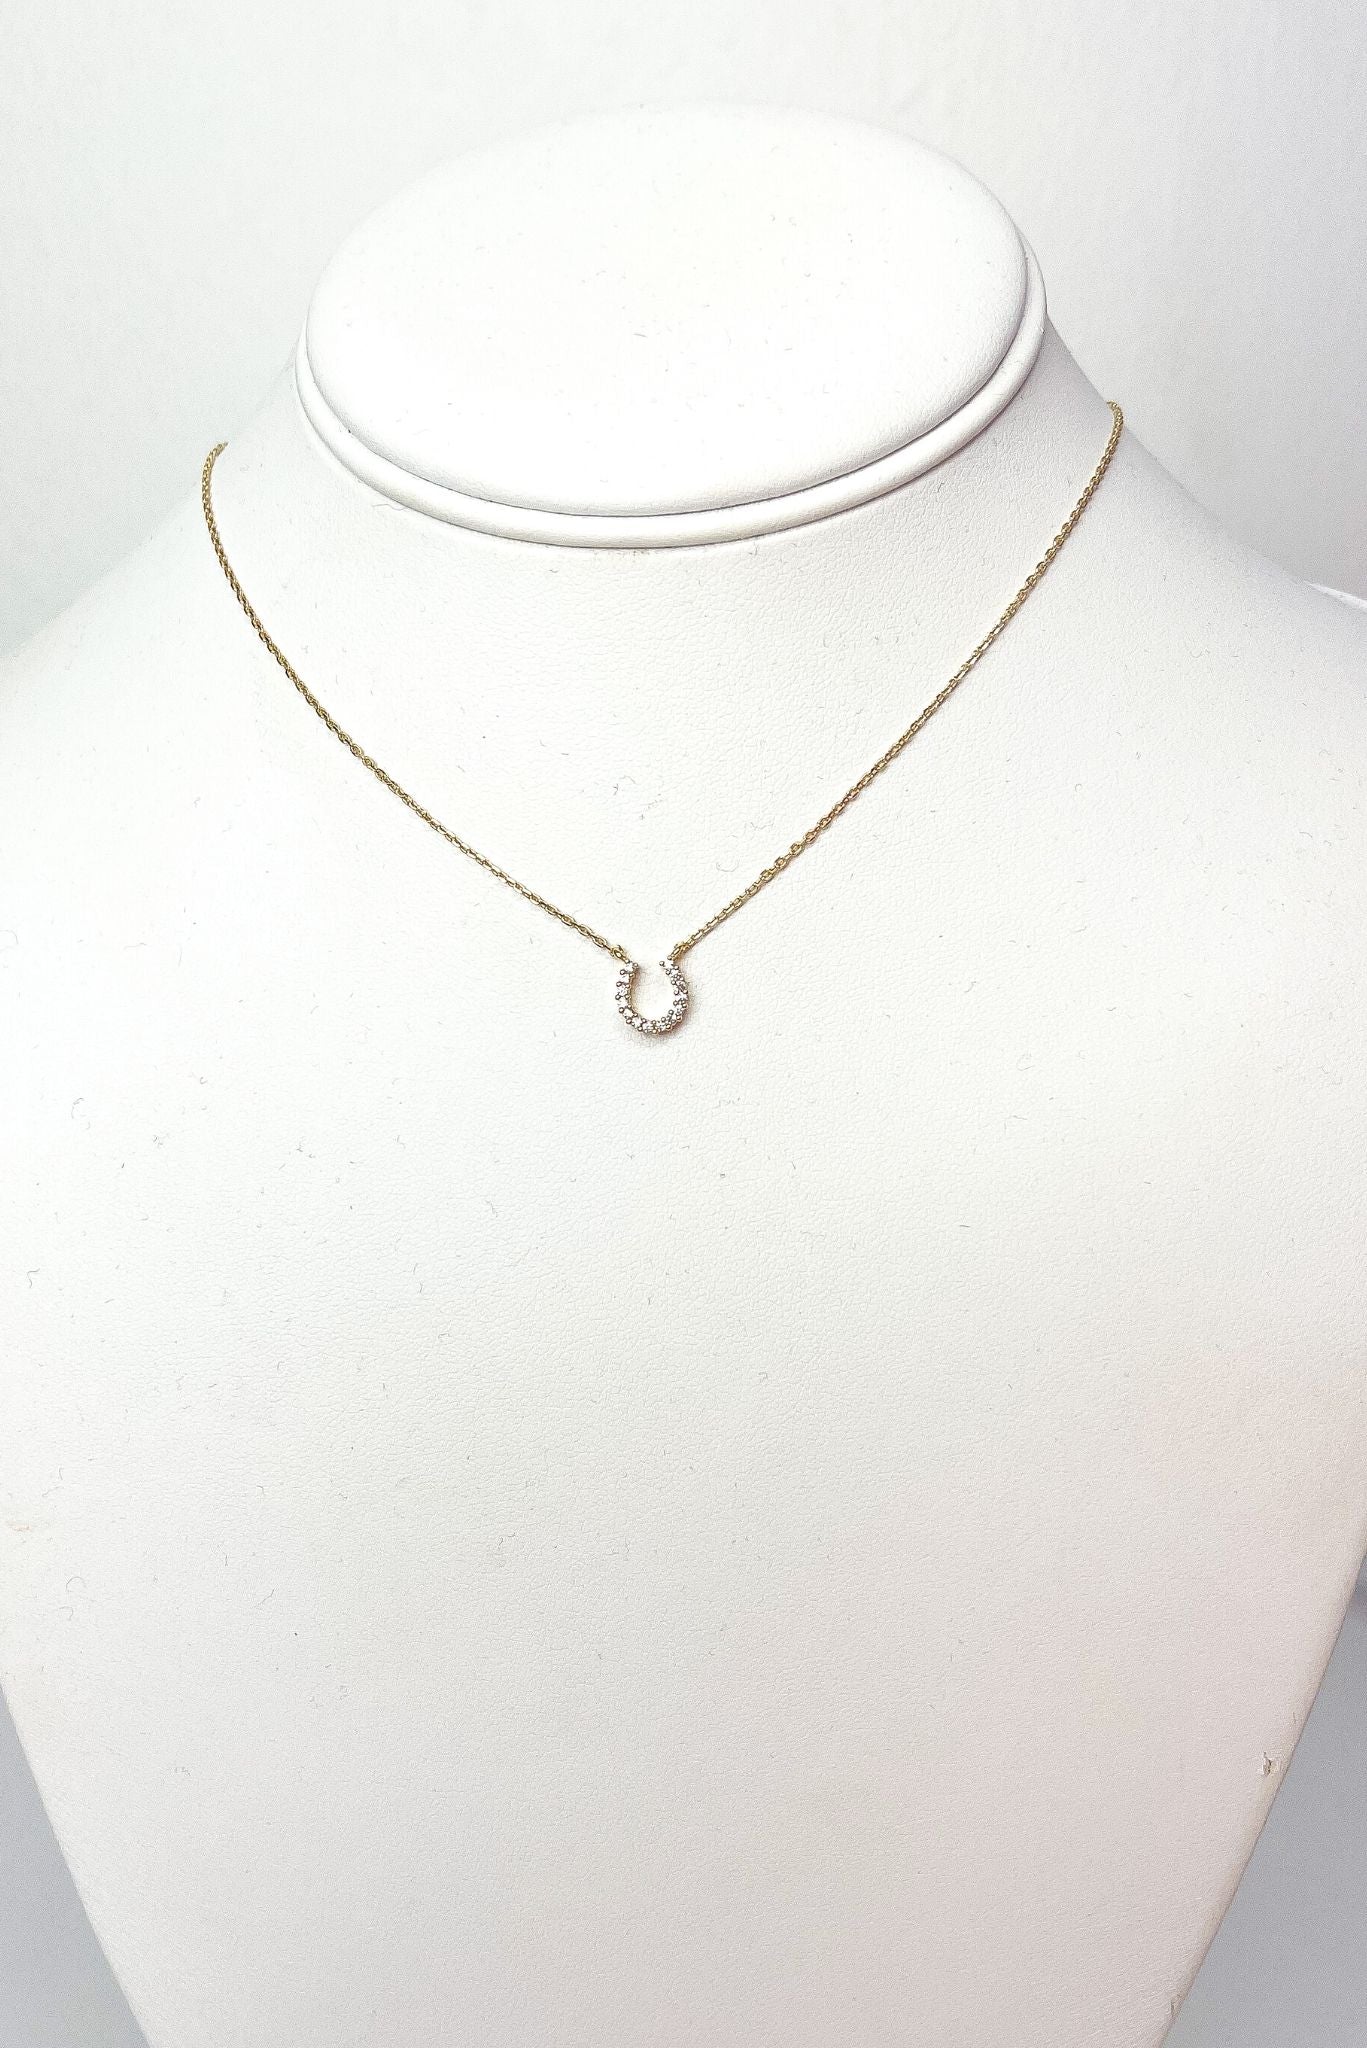 Gold Horseshoe Pendant Necklace, Shop Style Your Senses By Mallory Fitzsimmons